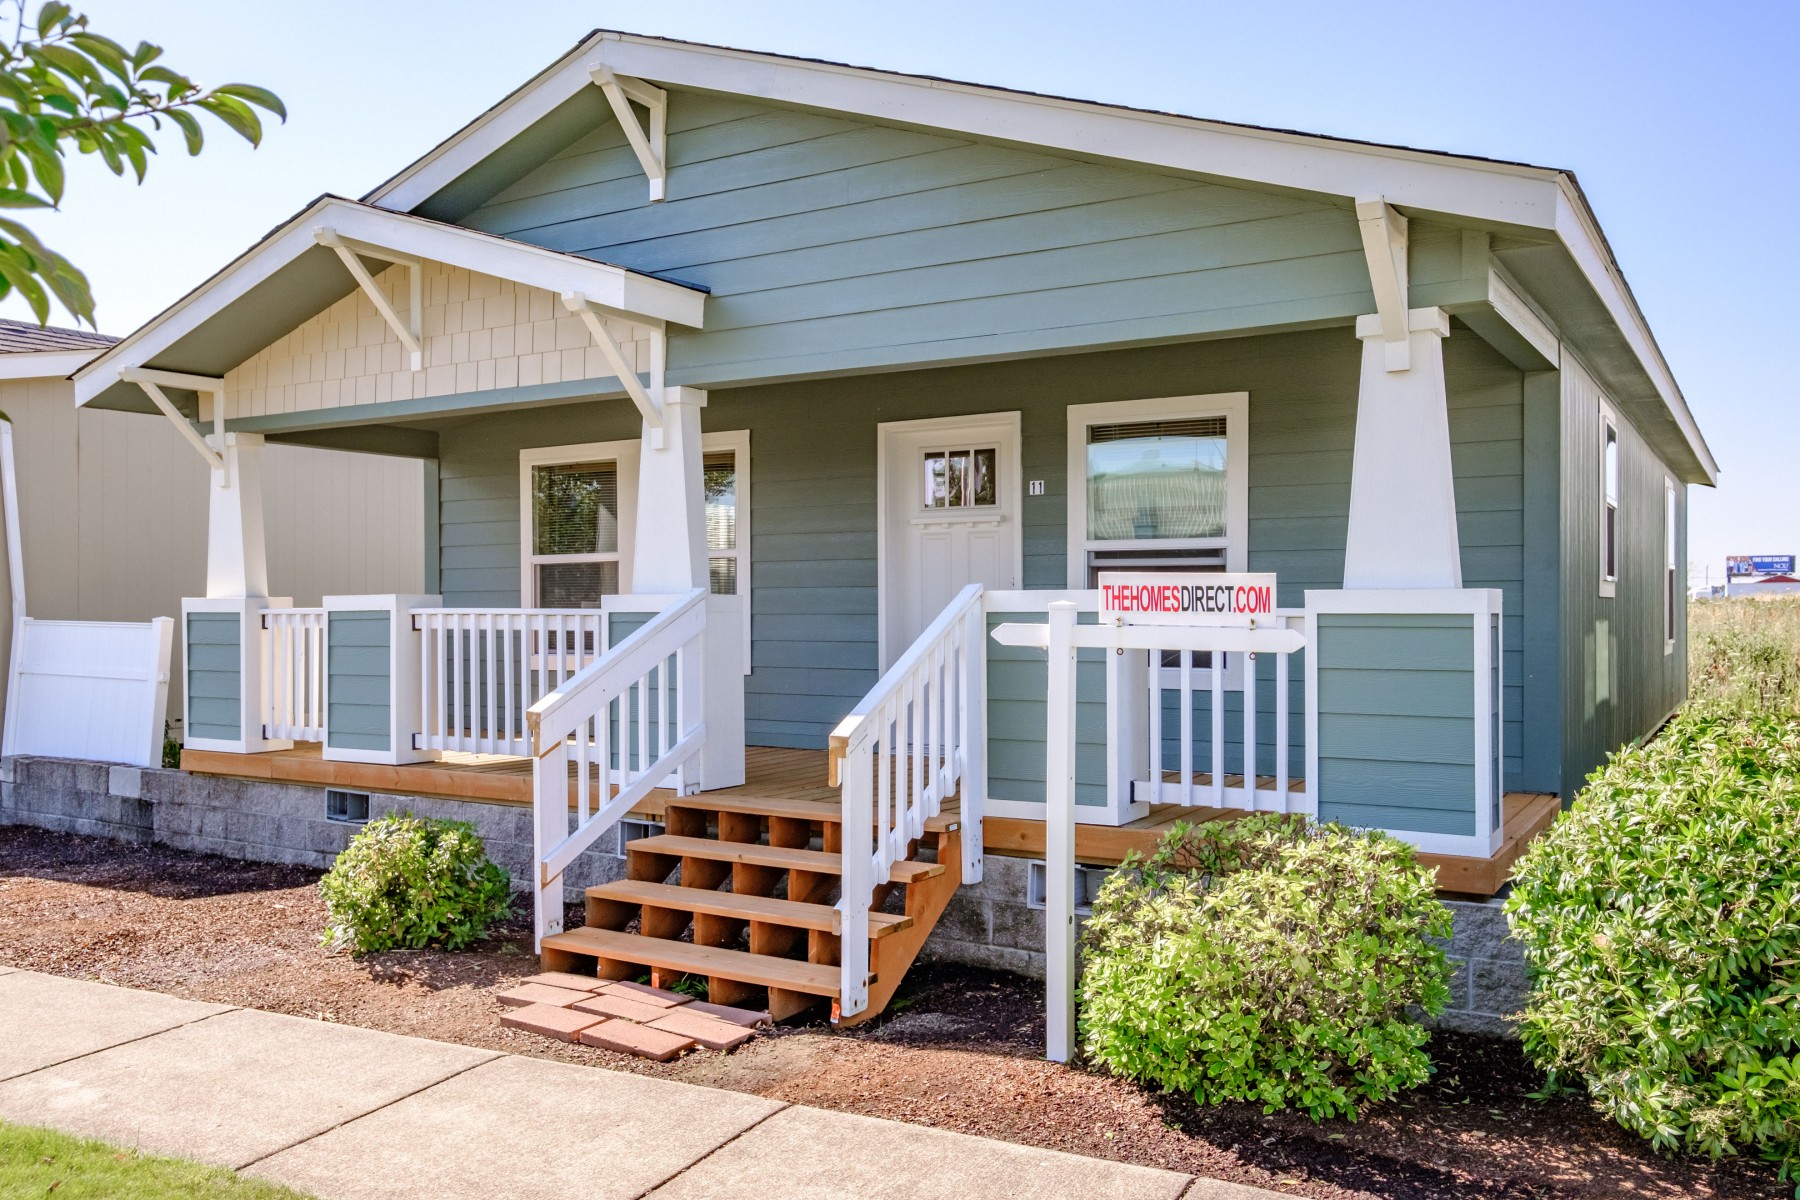 Top 20 Best Mobile Homes To Buy In 2019 Homes Direct